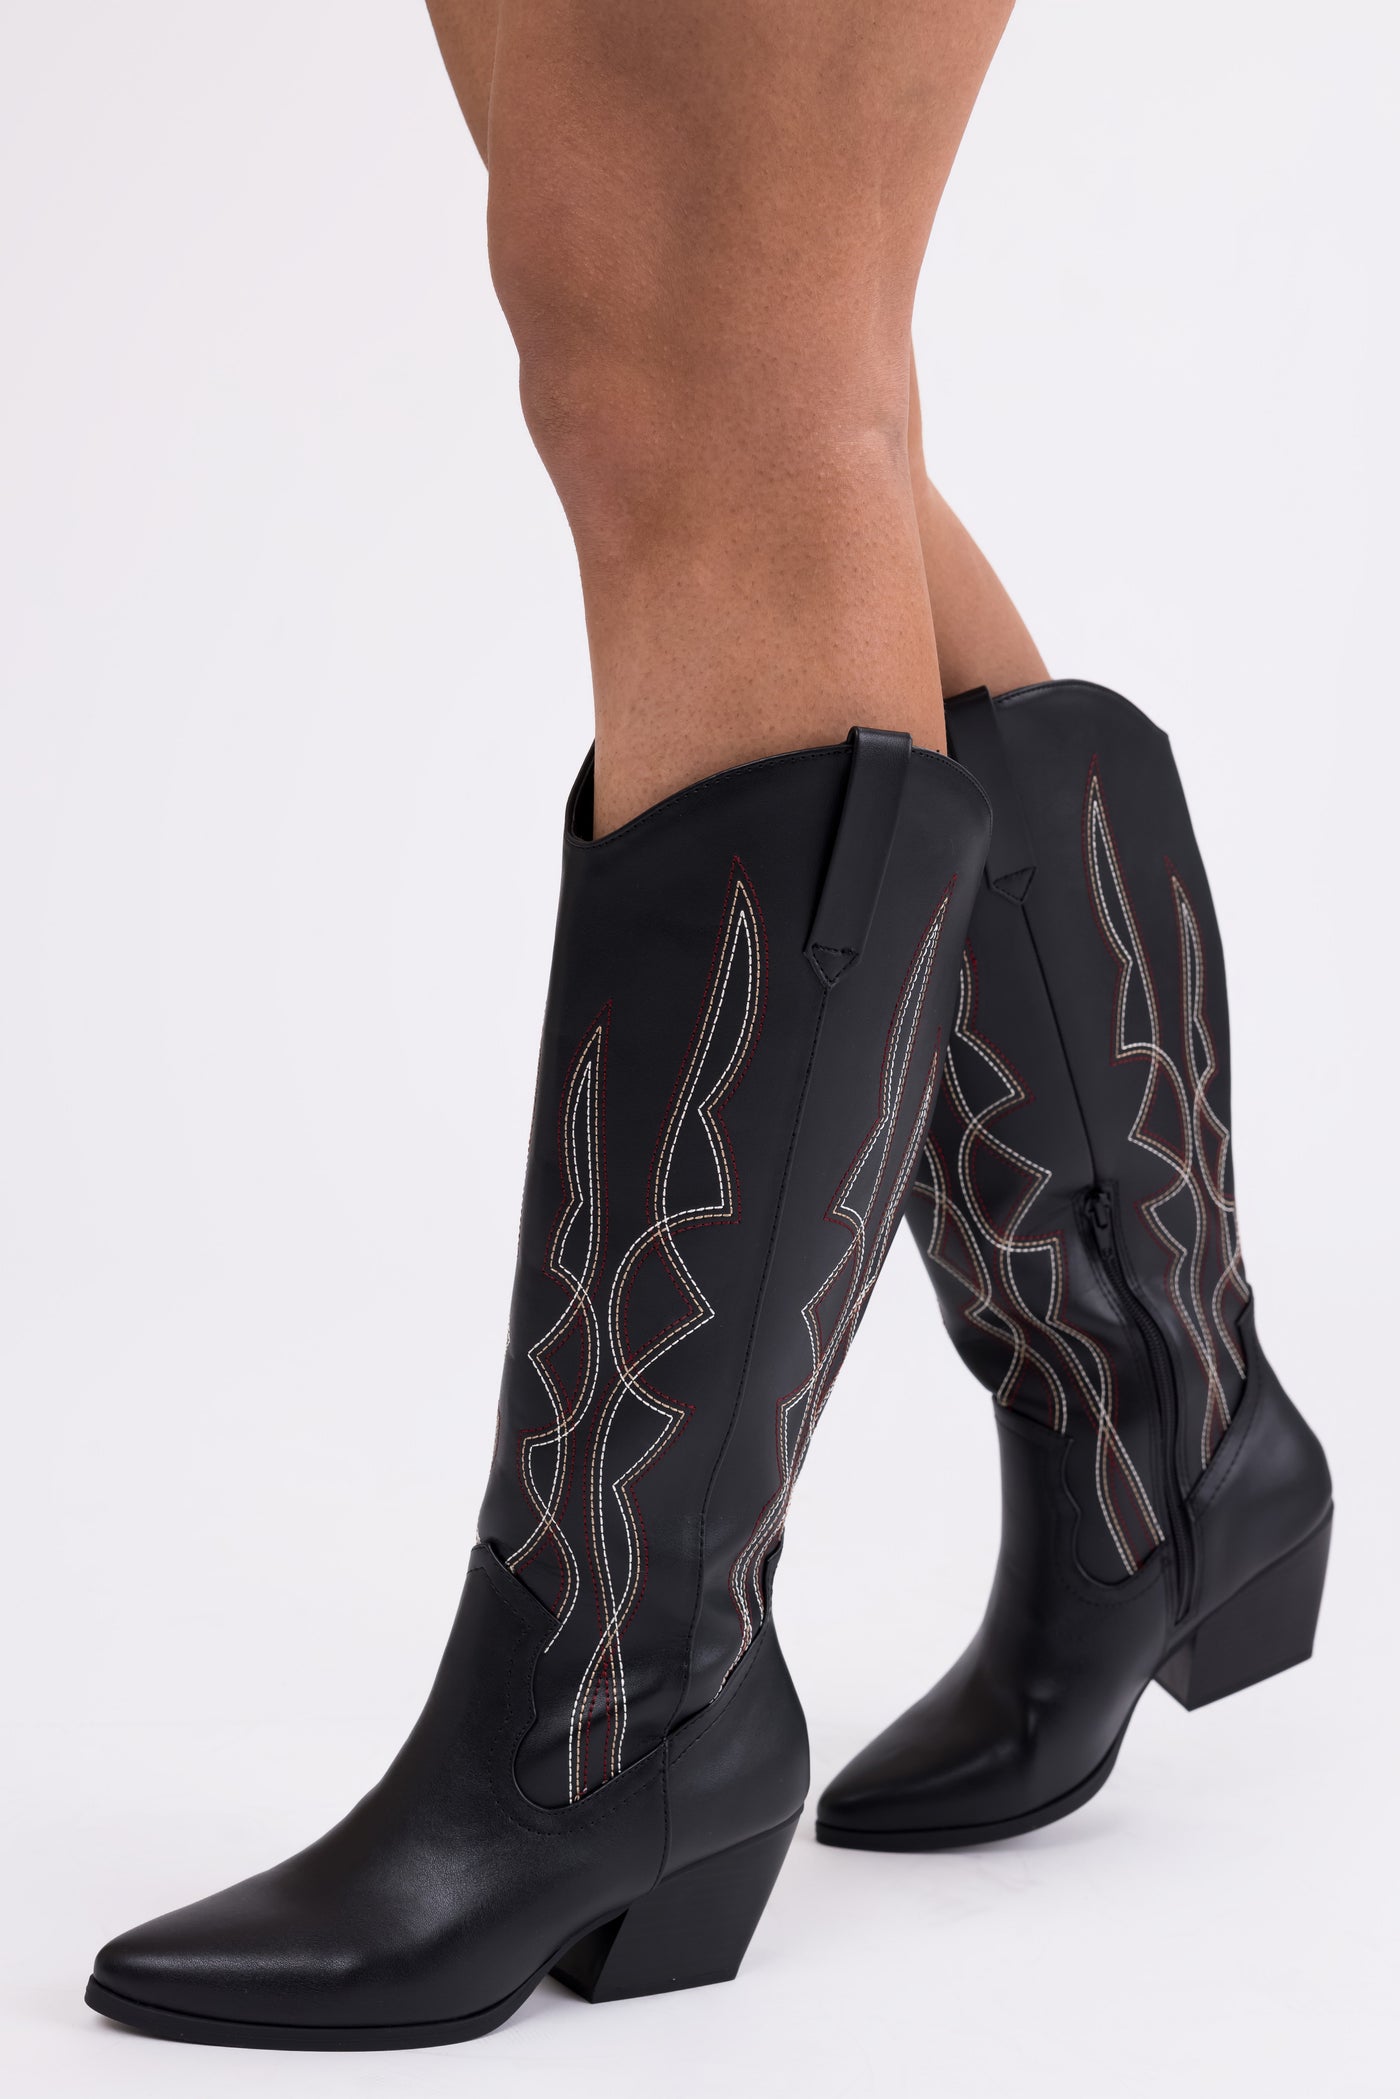 Black Western Style Knee High Boots